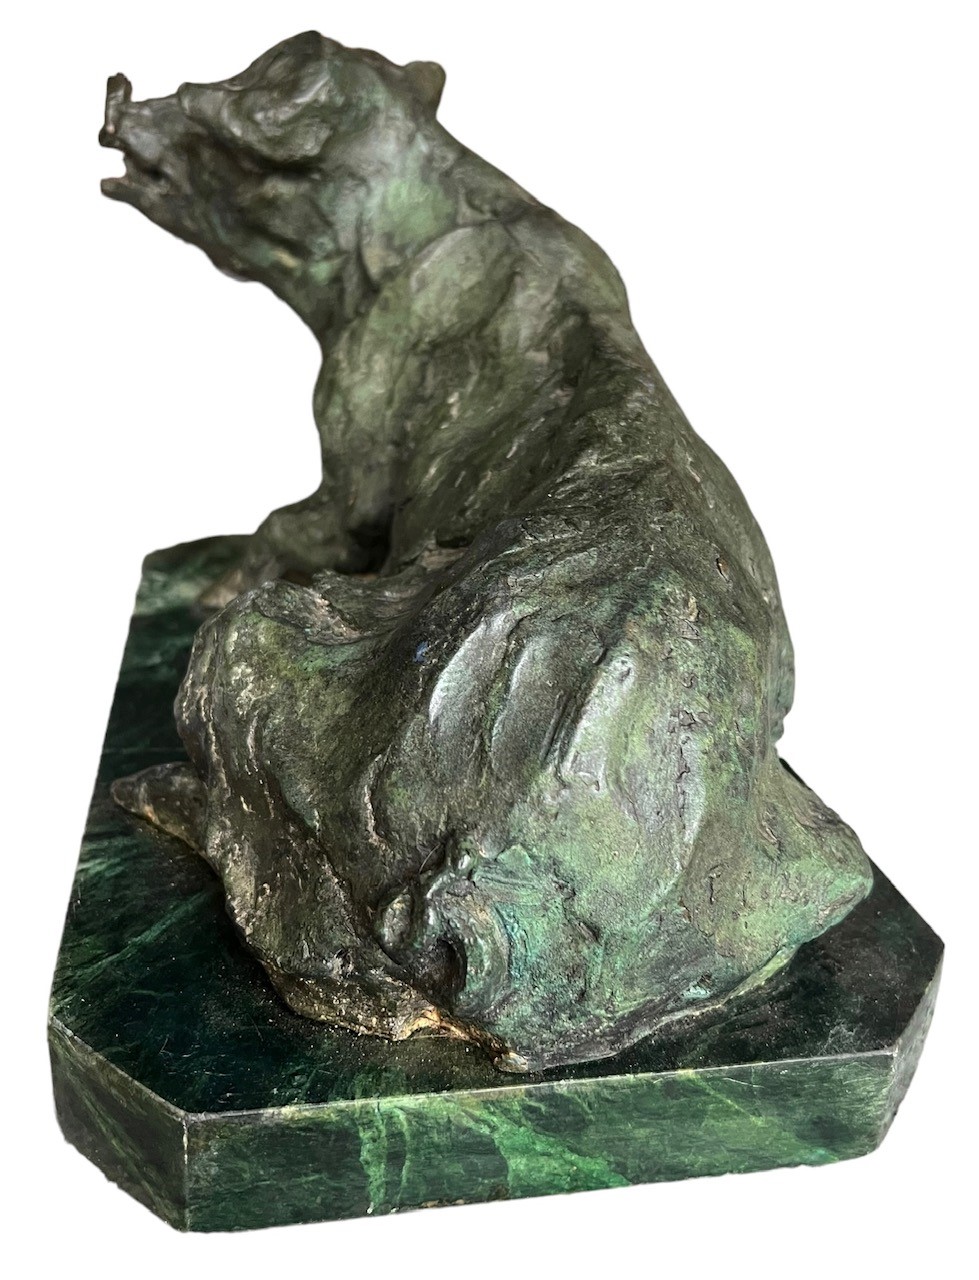 A DECORATIVE 20TH CENTURY BRONZE SCULPTURE OF A SEATED PIG Raised on a marble plinth base, - Image 4 of 8